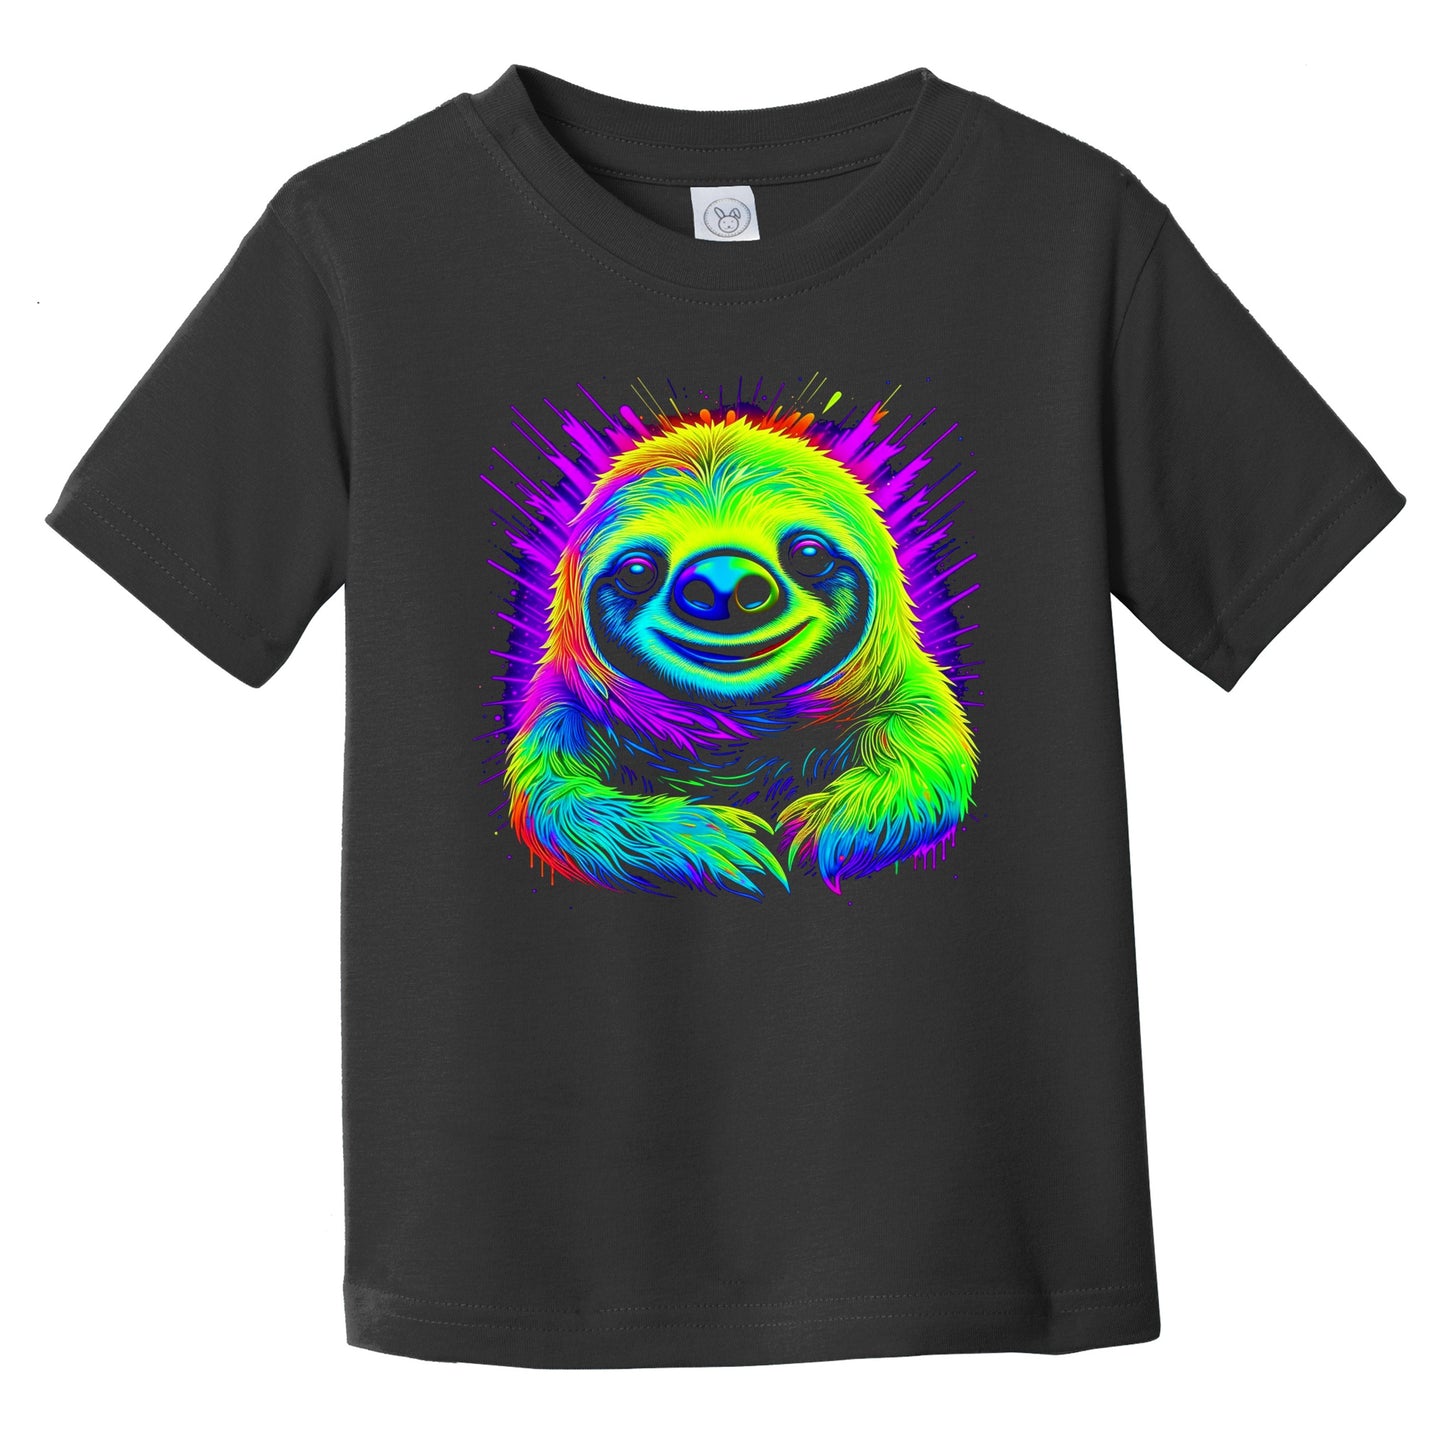 Colorful Bright Sloth Vibrant Psychedelic Animal Art Infant Toddler T-Shirt